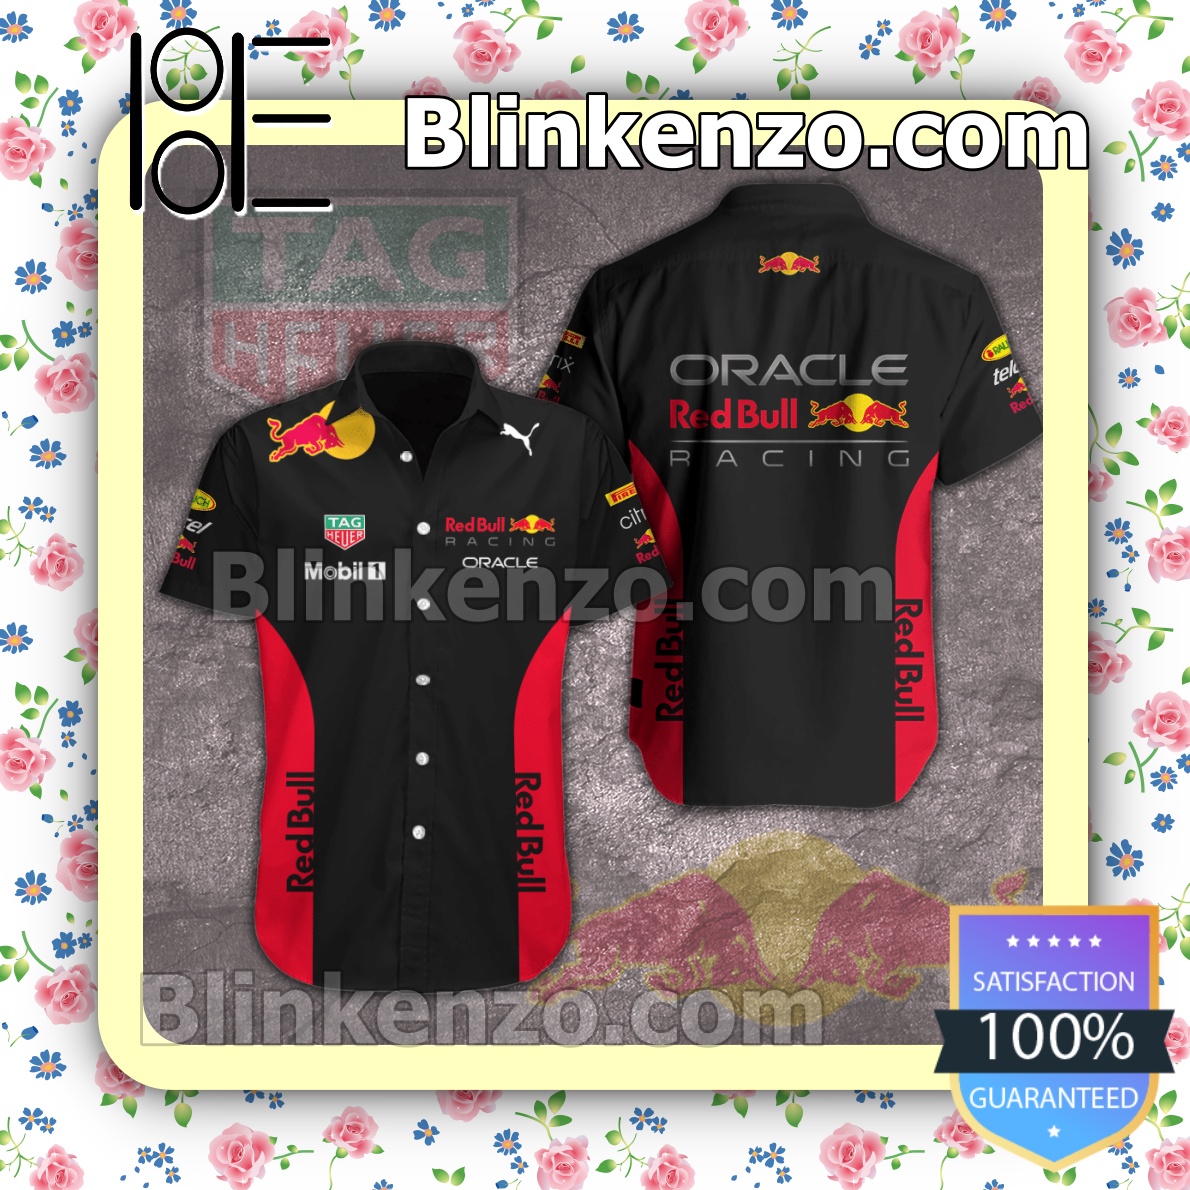 Oracle Red Bull Racing Shop: Heritage Padded Jacket